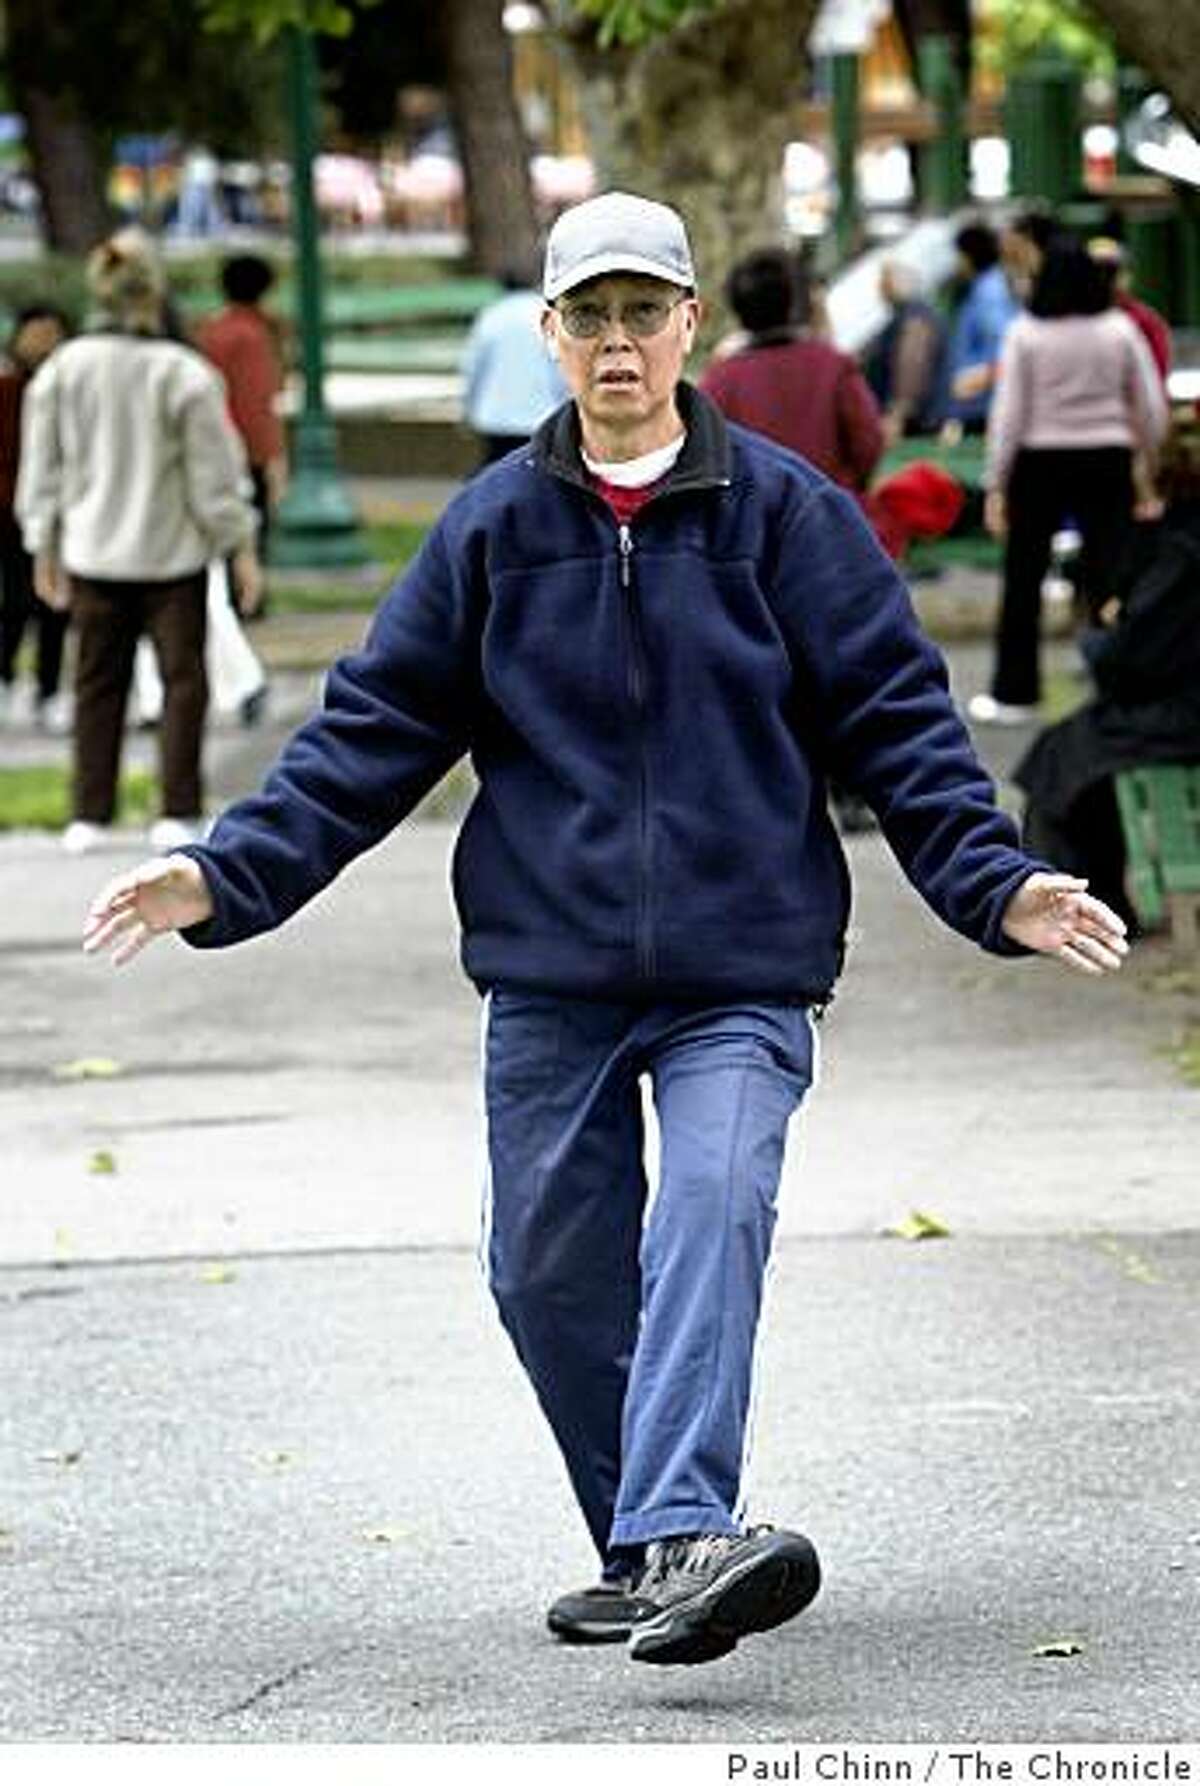 Andy Chu participates in his morning Tai Chi class at Washington Square Park in San Francisco, Calif., on Friday, June 5, 2009. Chu uses the daily exercise routine to help manage his diabetes.